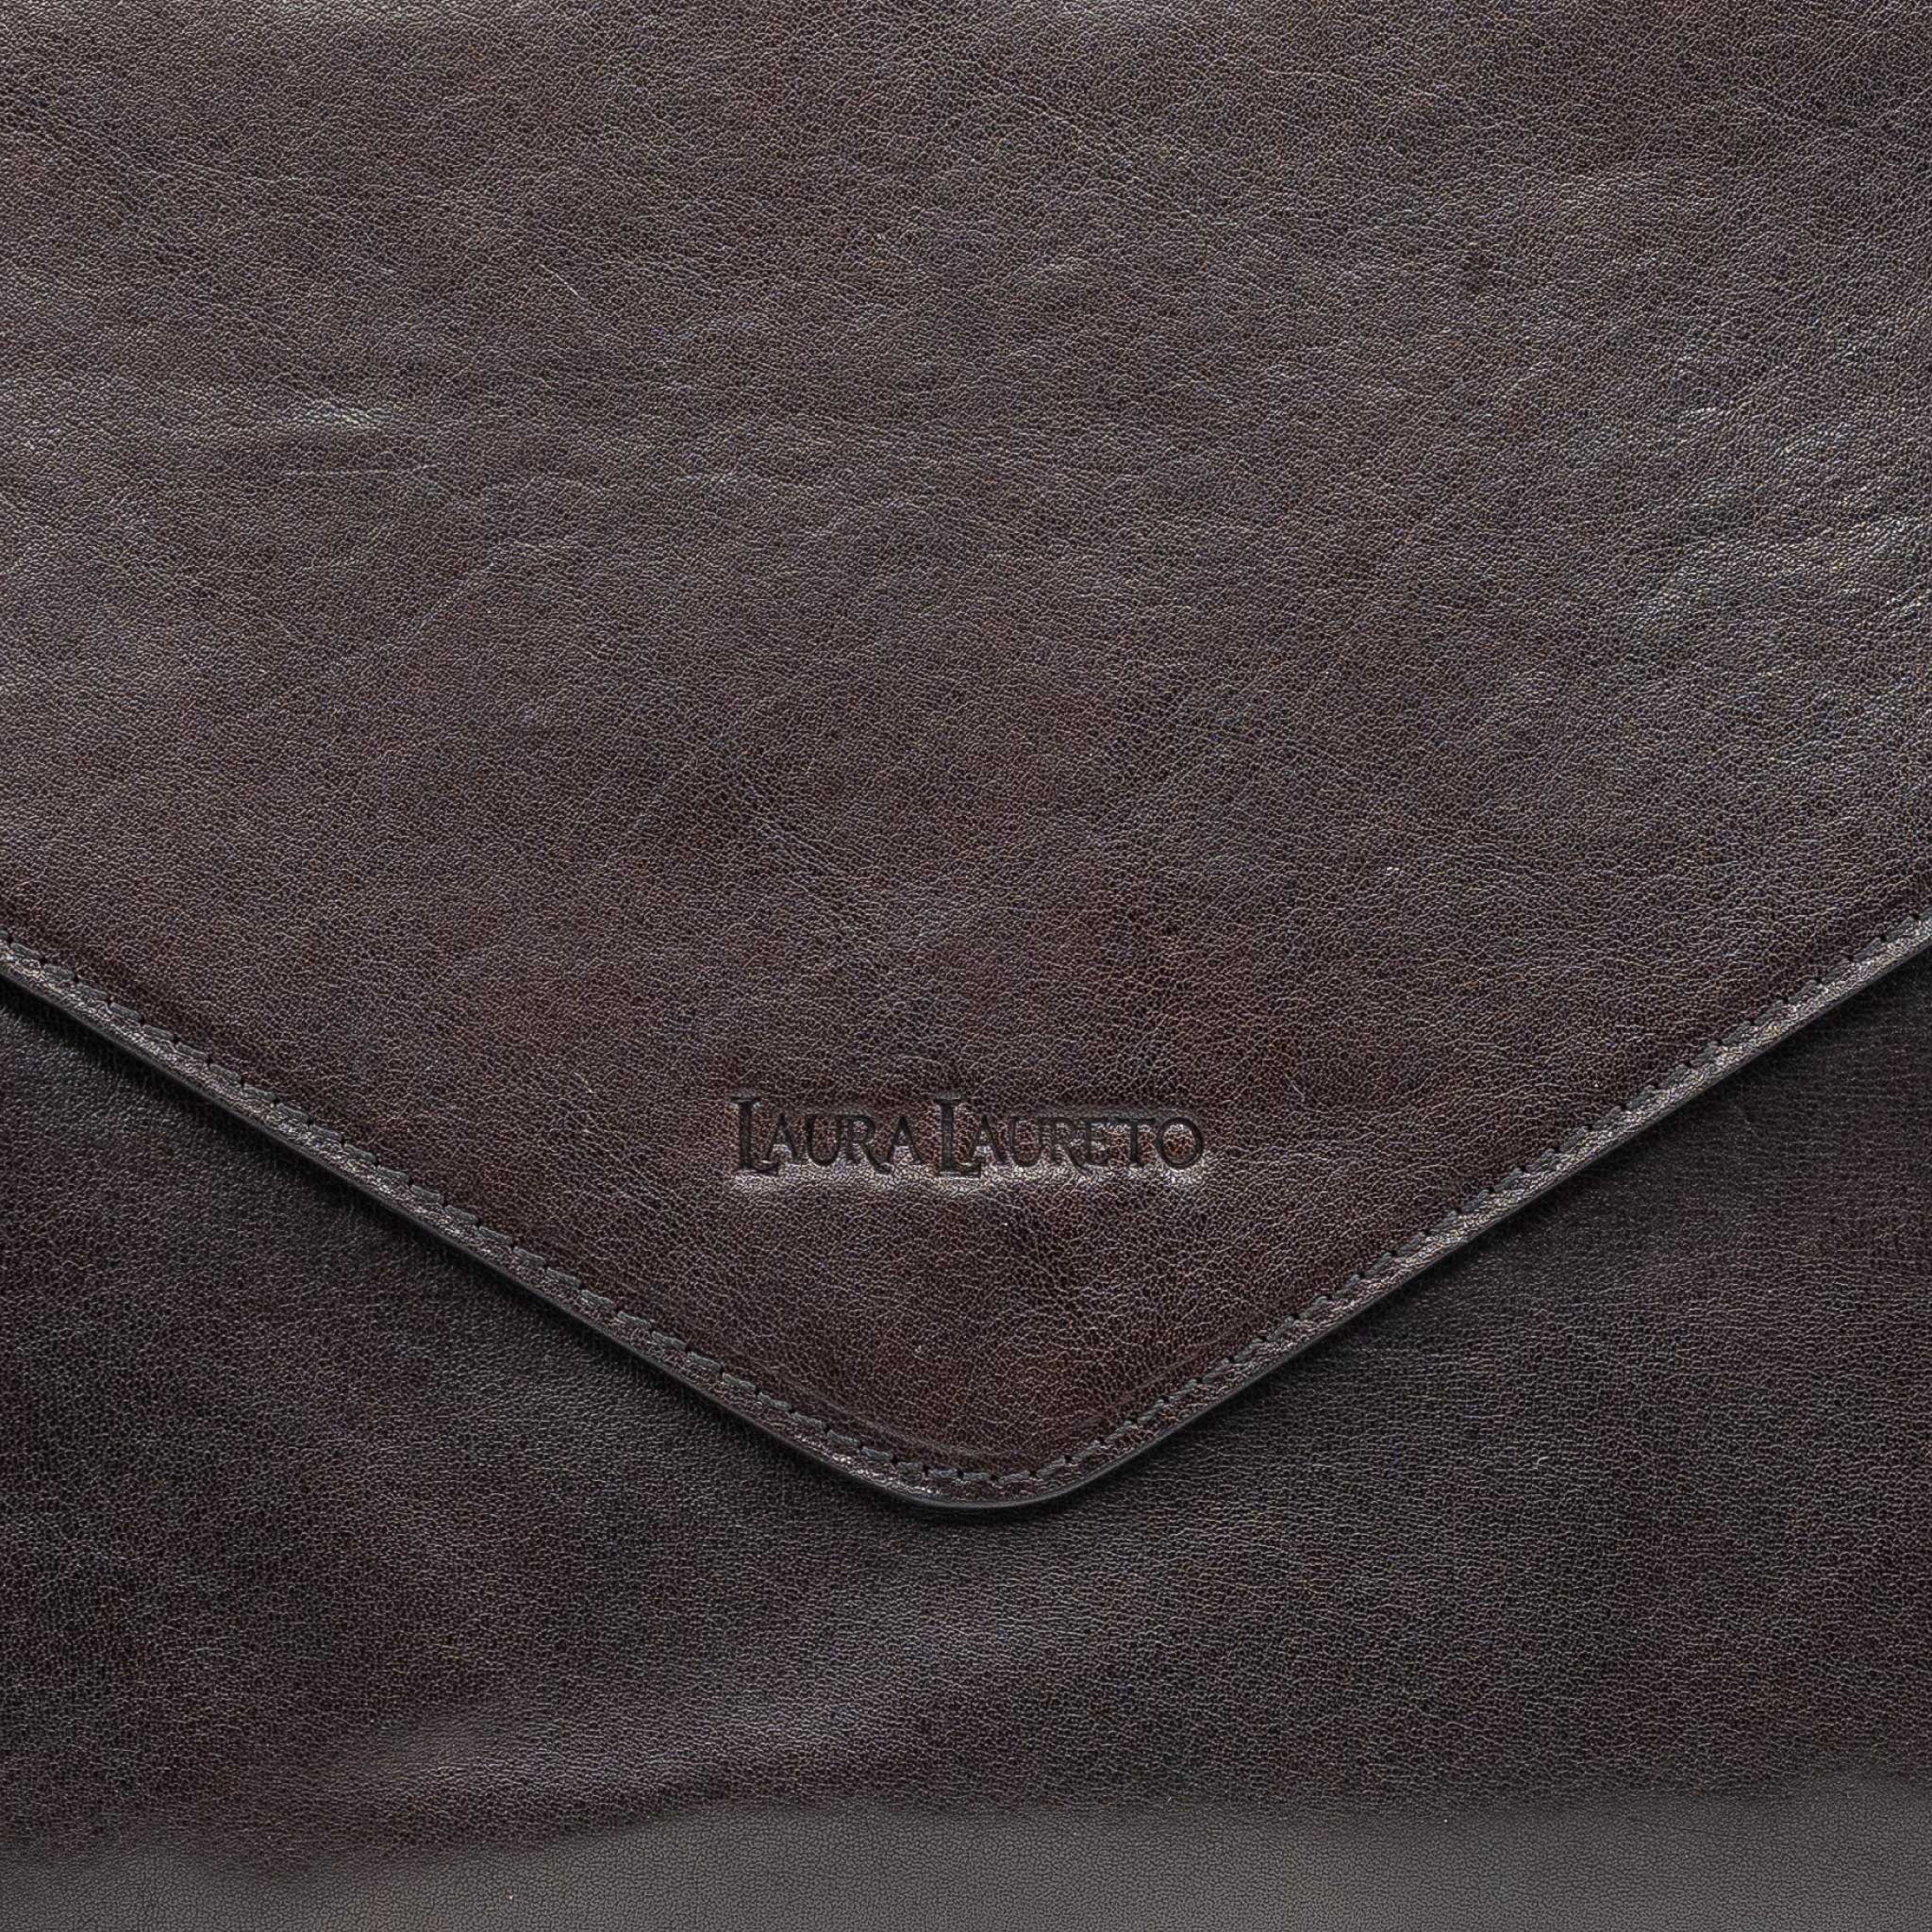 The Iconic Envelope Bag®